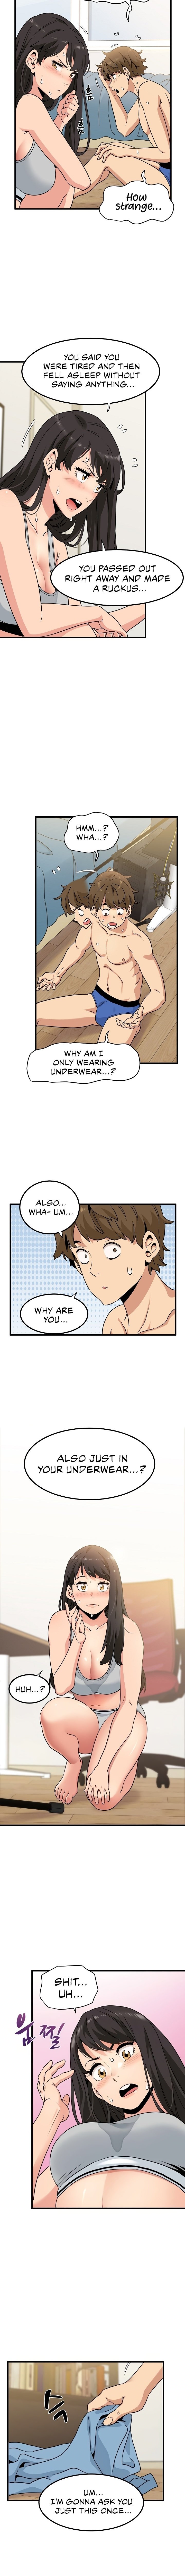 a-turning-point-chap-3-5